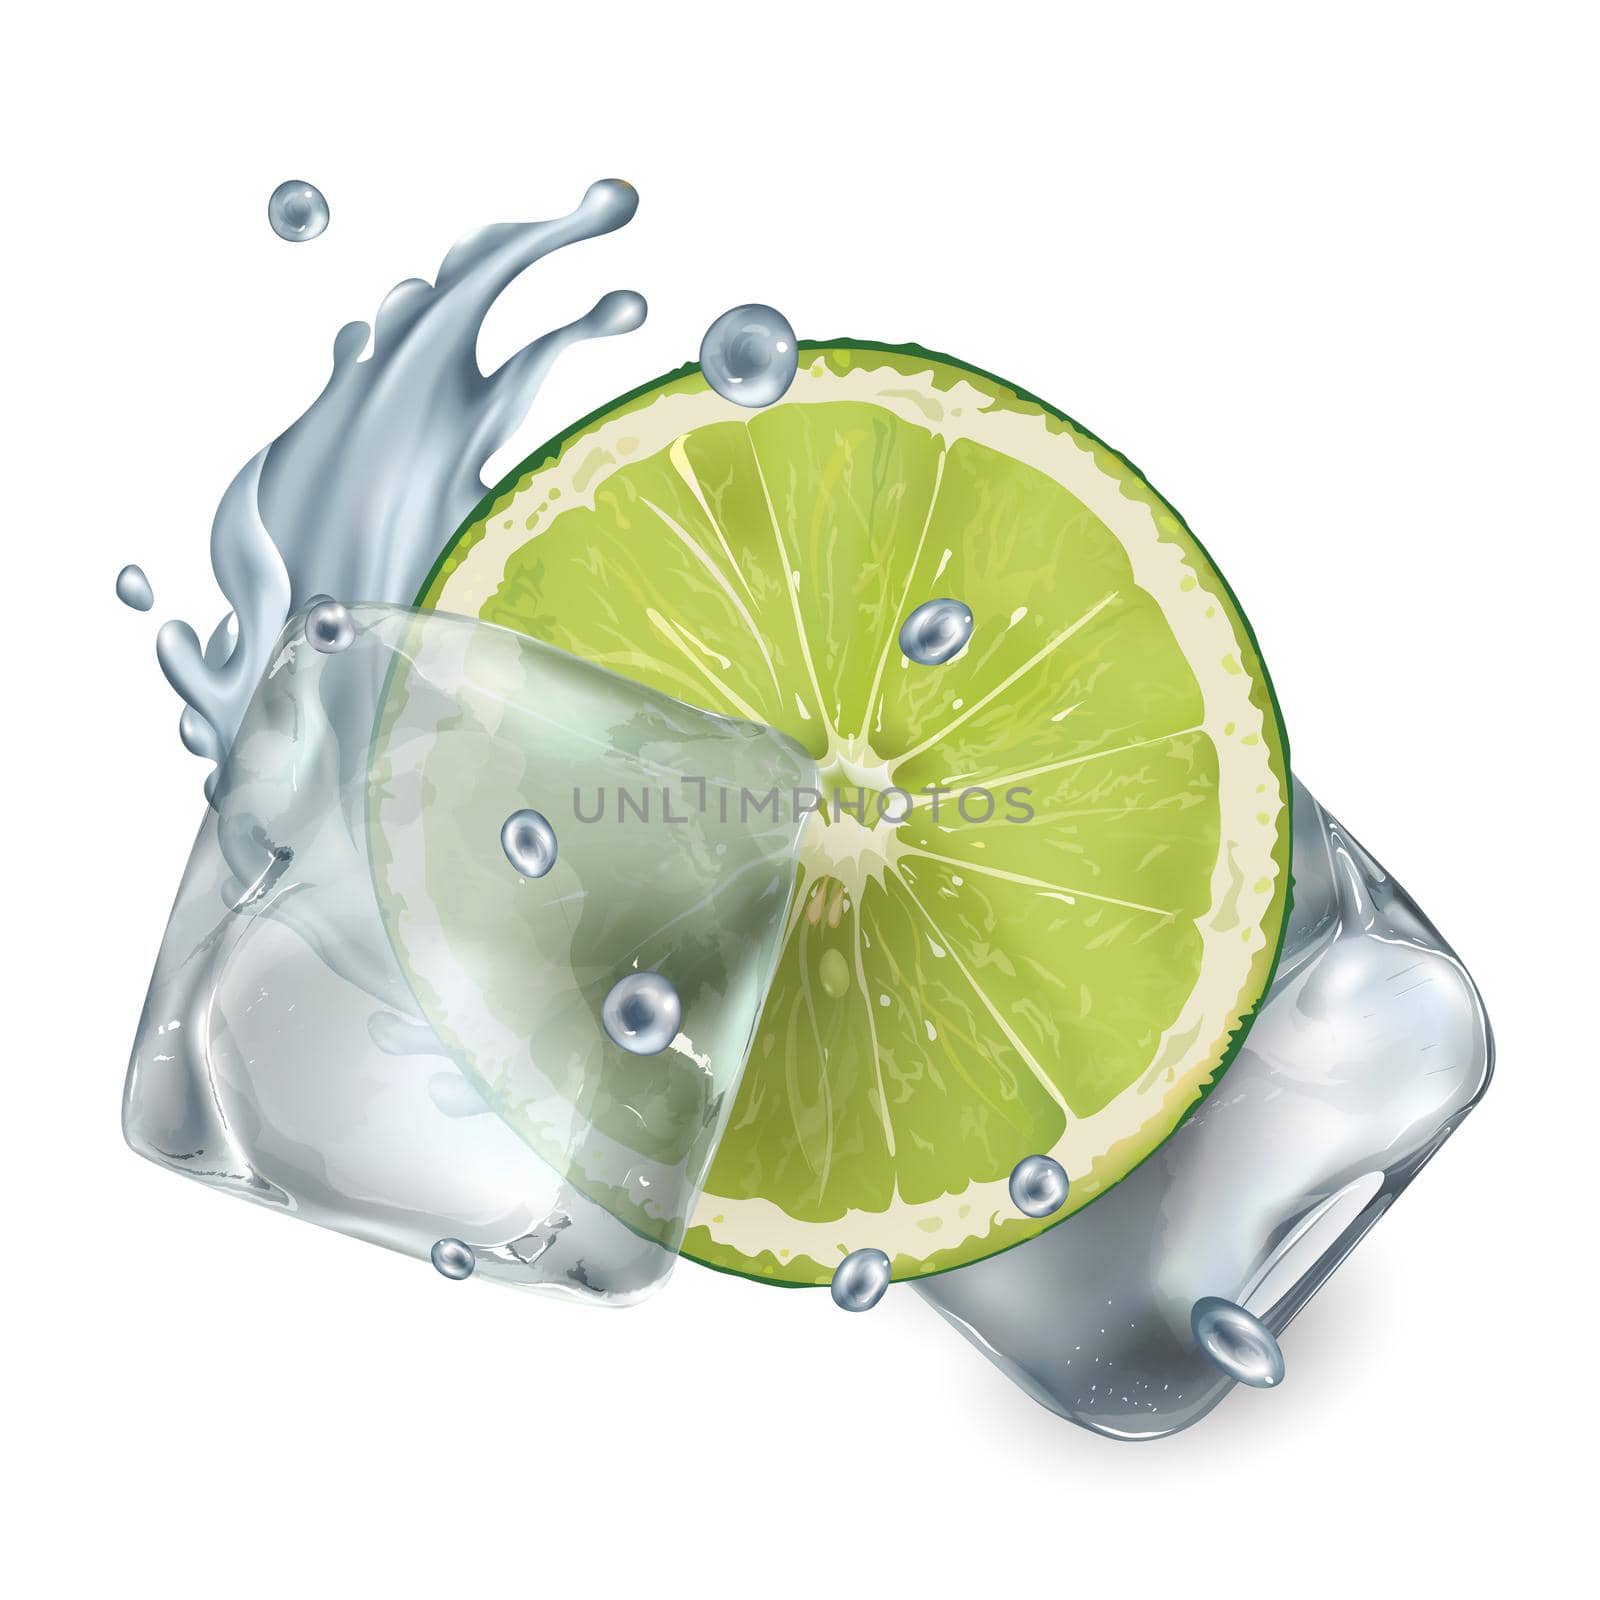 Composition with fresh lime and ice cubes on a white background. Realistic style illustration.